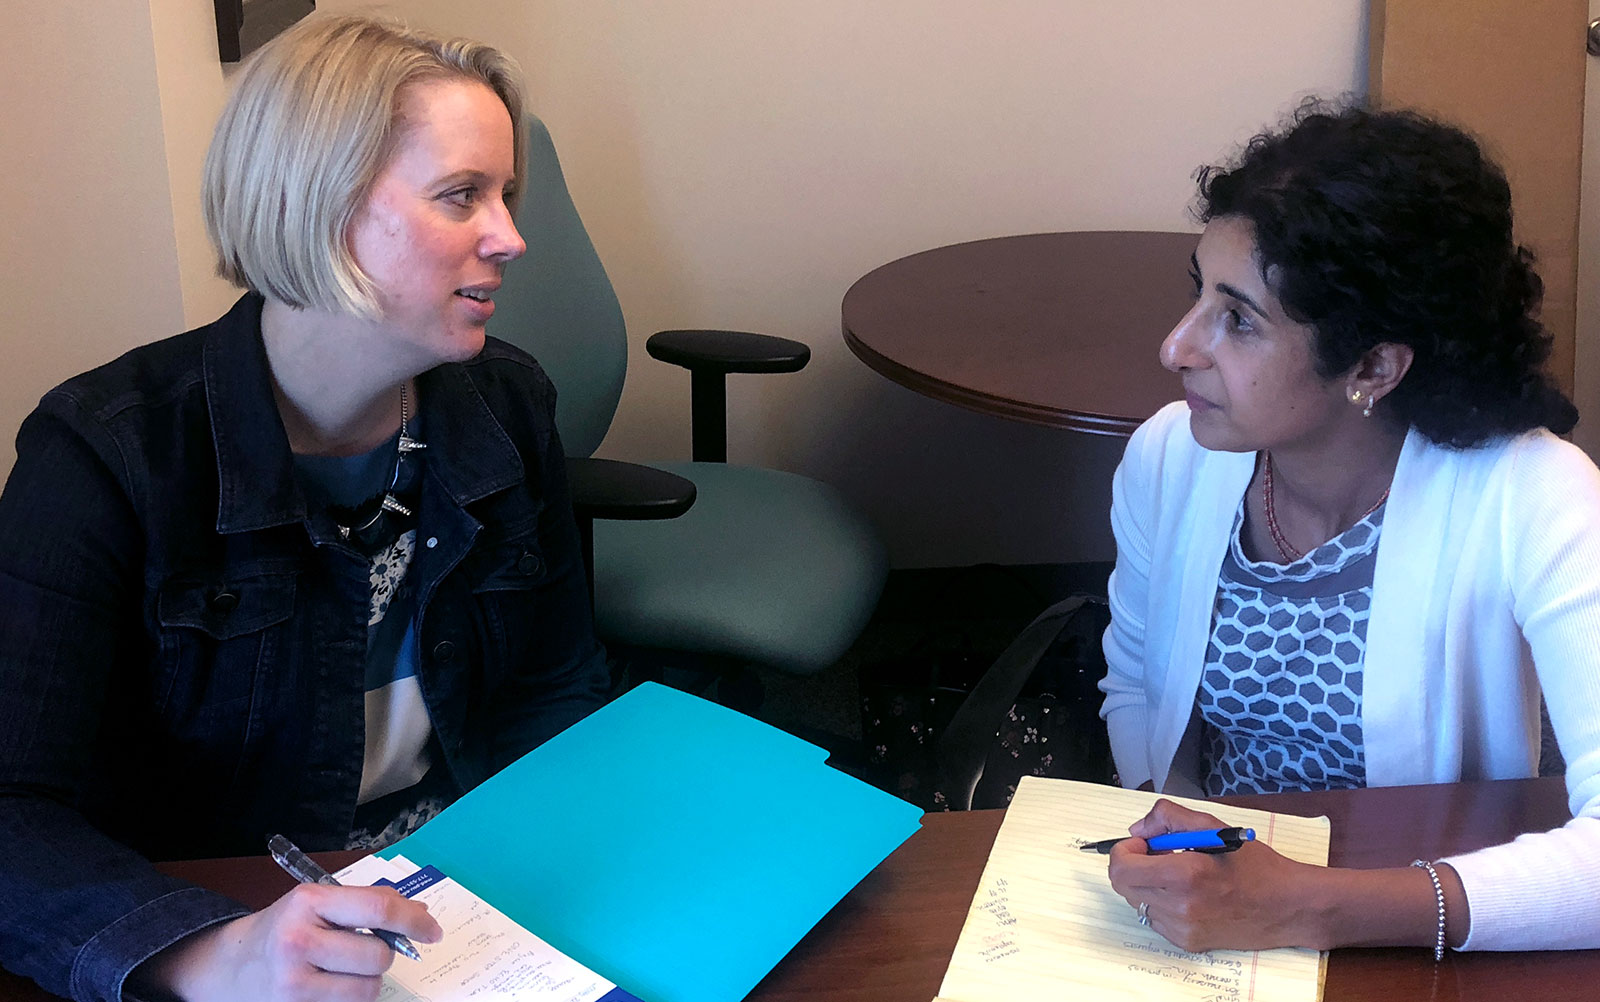 Dr. Jennifer Kraschnewski and Dr. Deepa Sekhar are pictured sitting at a table with folders open in front of them.